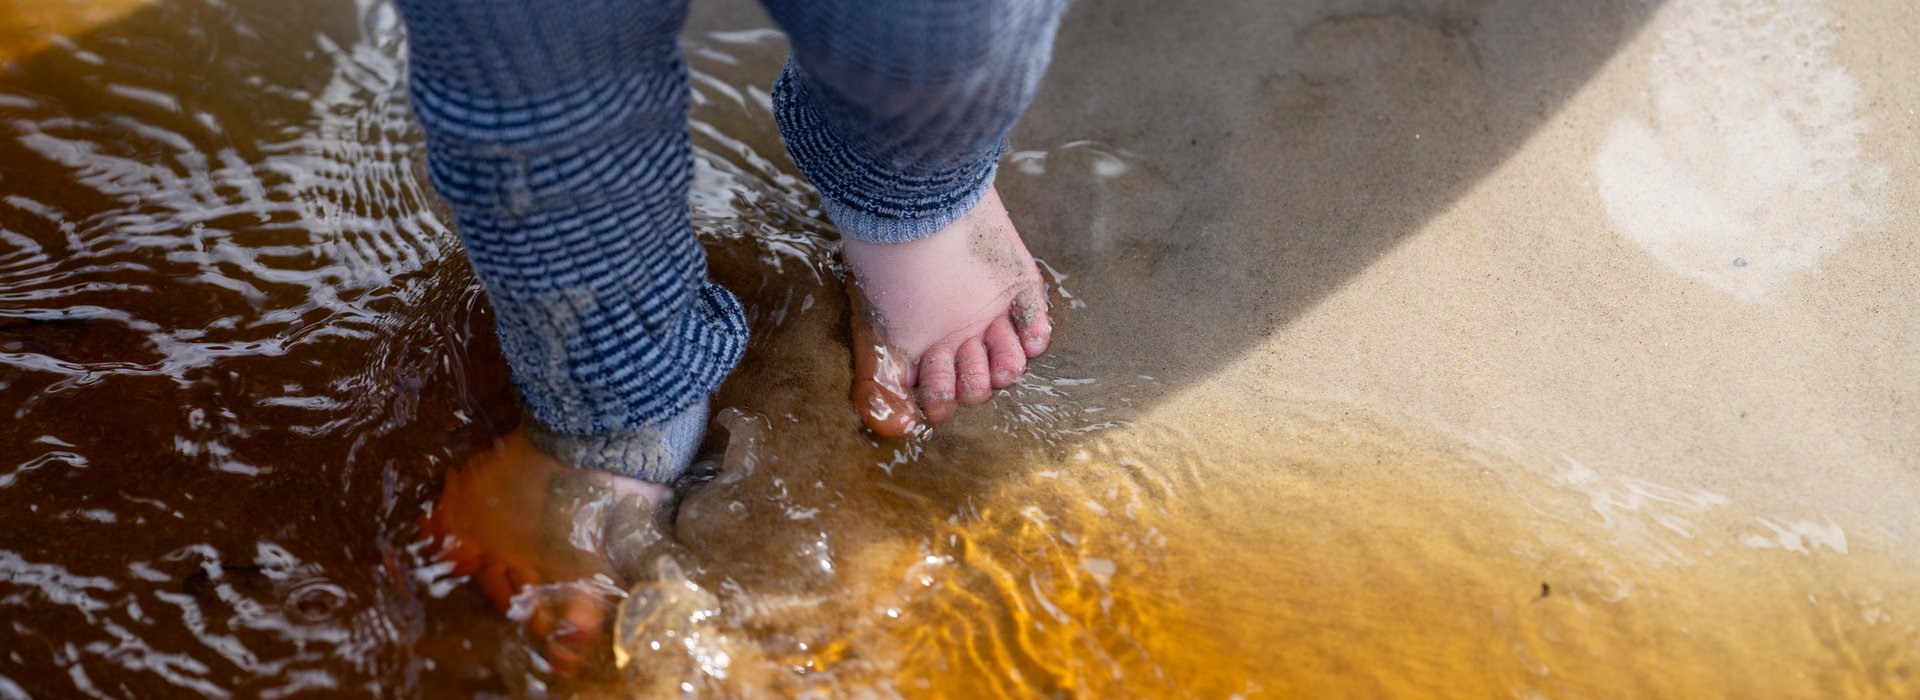 Child with feet in water